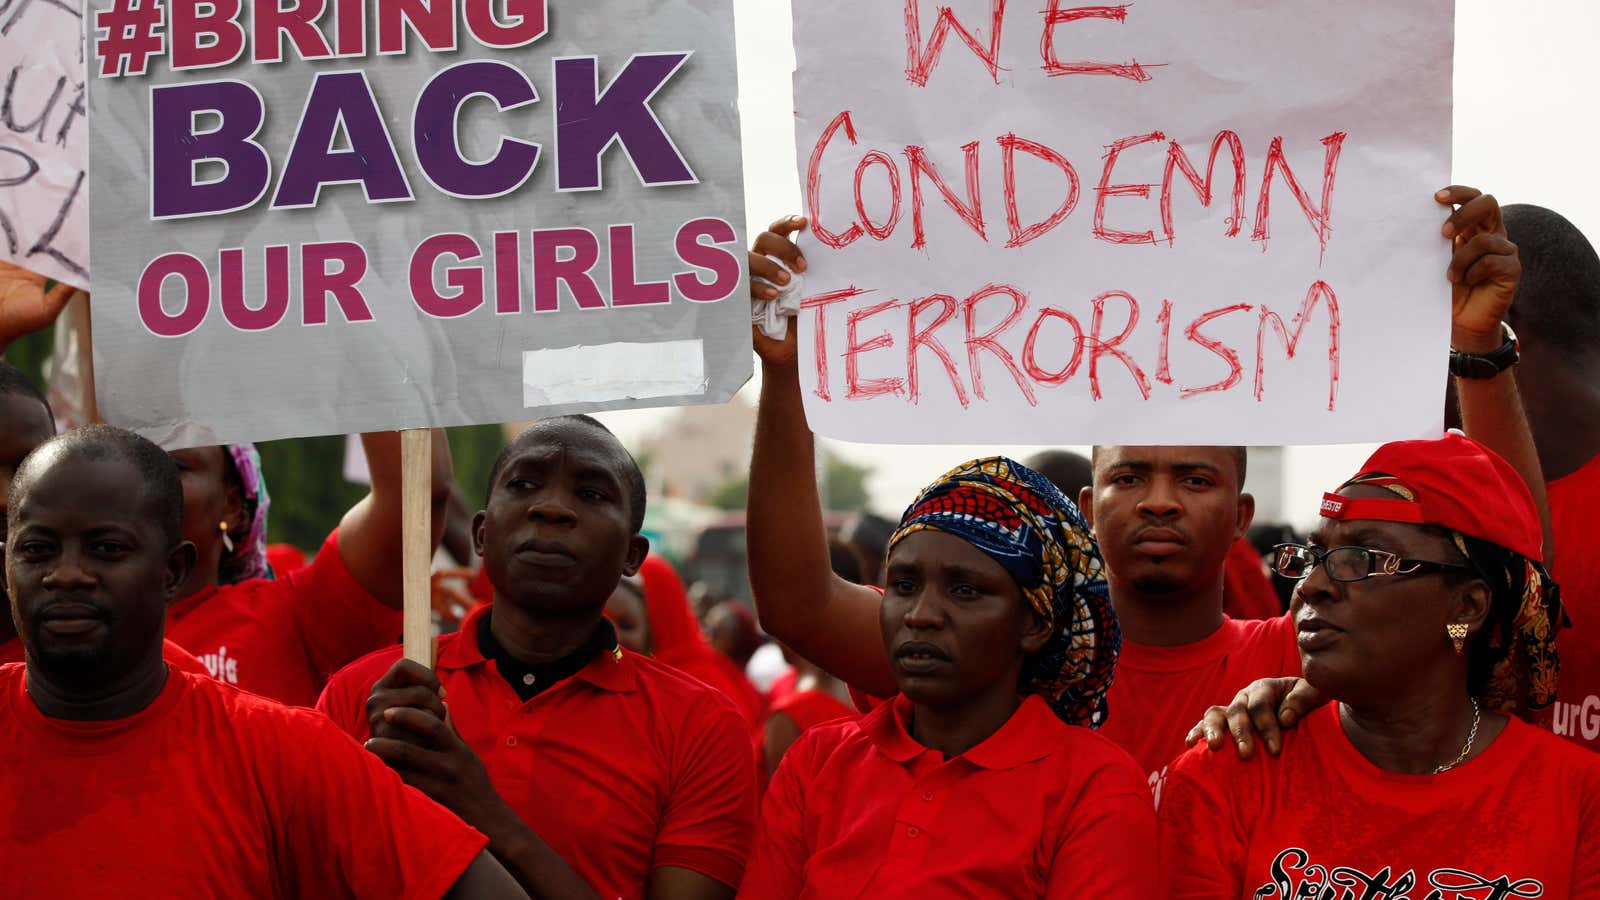 “Bring Back Our Girls” campaigners in Abuja.